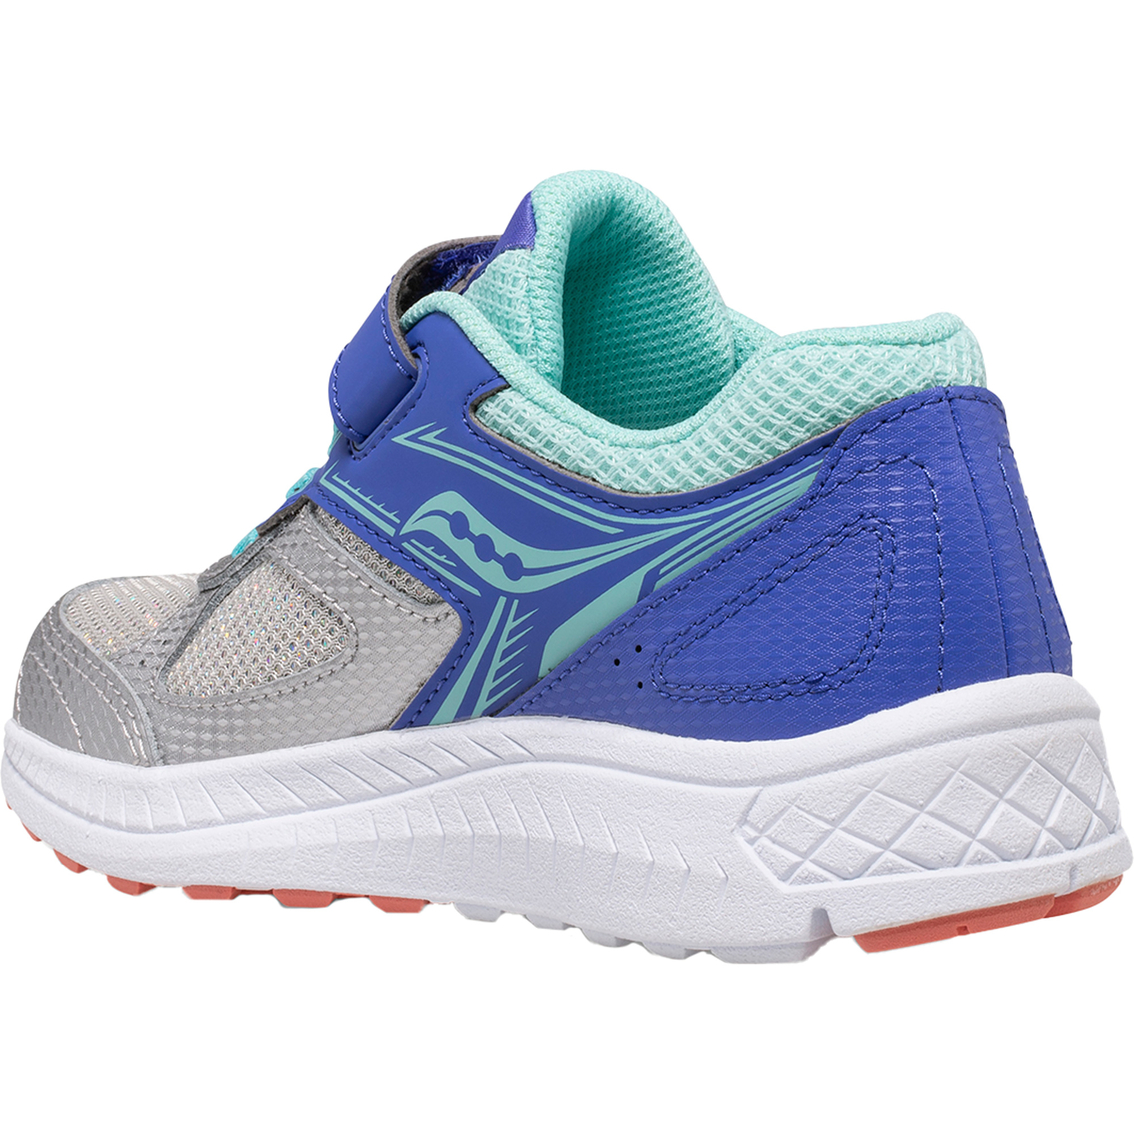 Saucony Girls Cohesion 14 A/C Running Shoes - Image 3 of 5